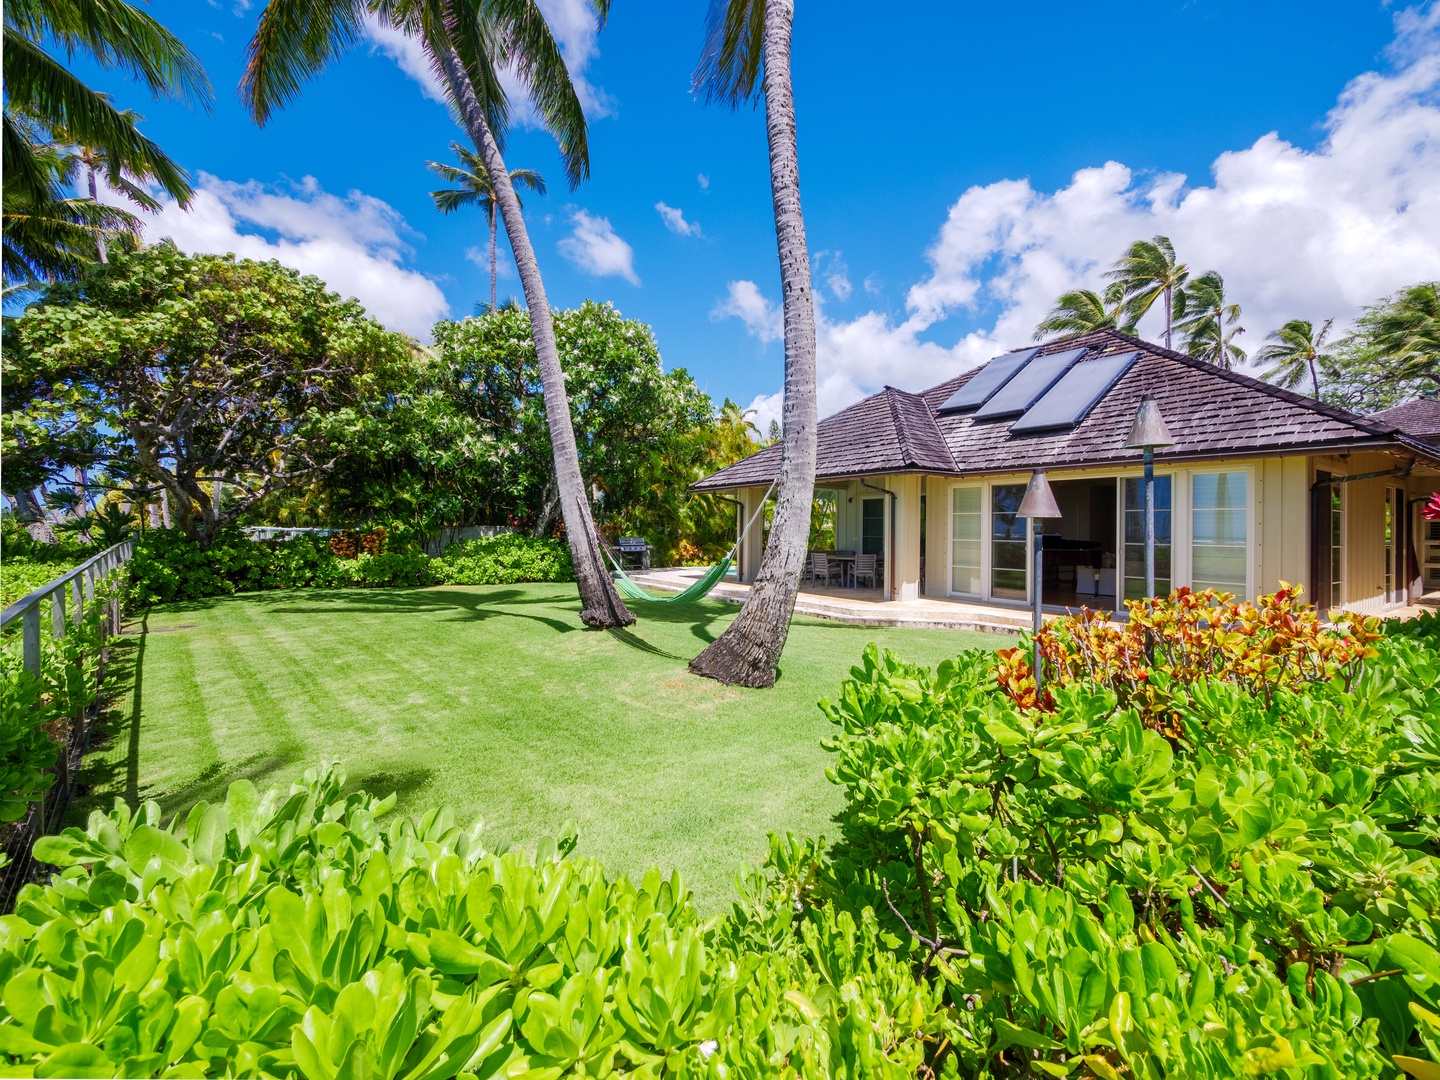 Honolulu Vacation Rentals, Paradise Beach Estate - Stroll through the verdant garden, a haven of serenity where nature's beauty unfolds with every step.